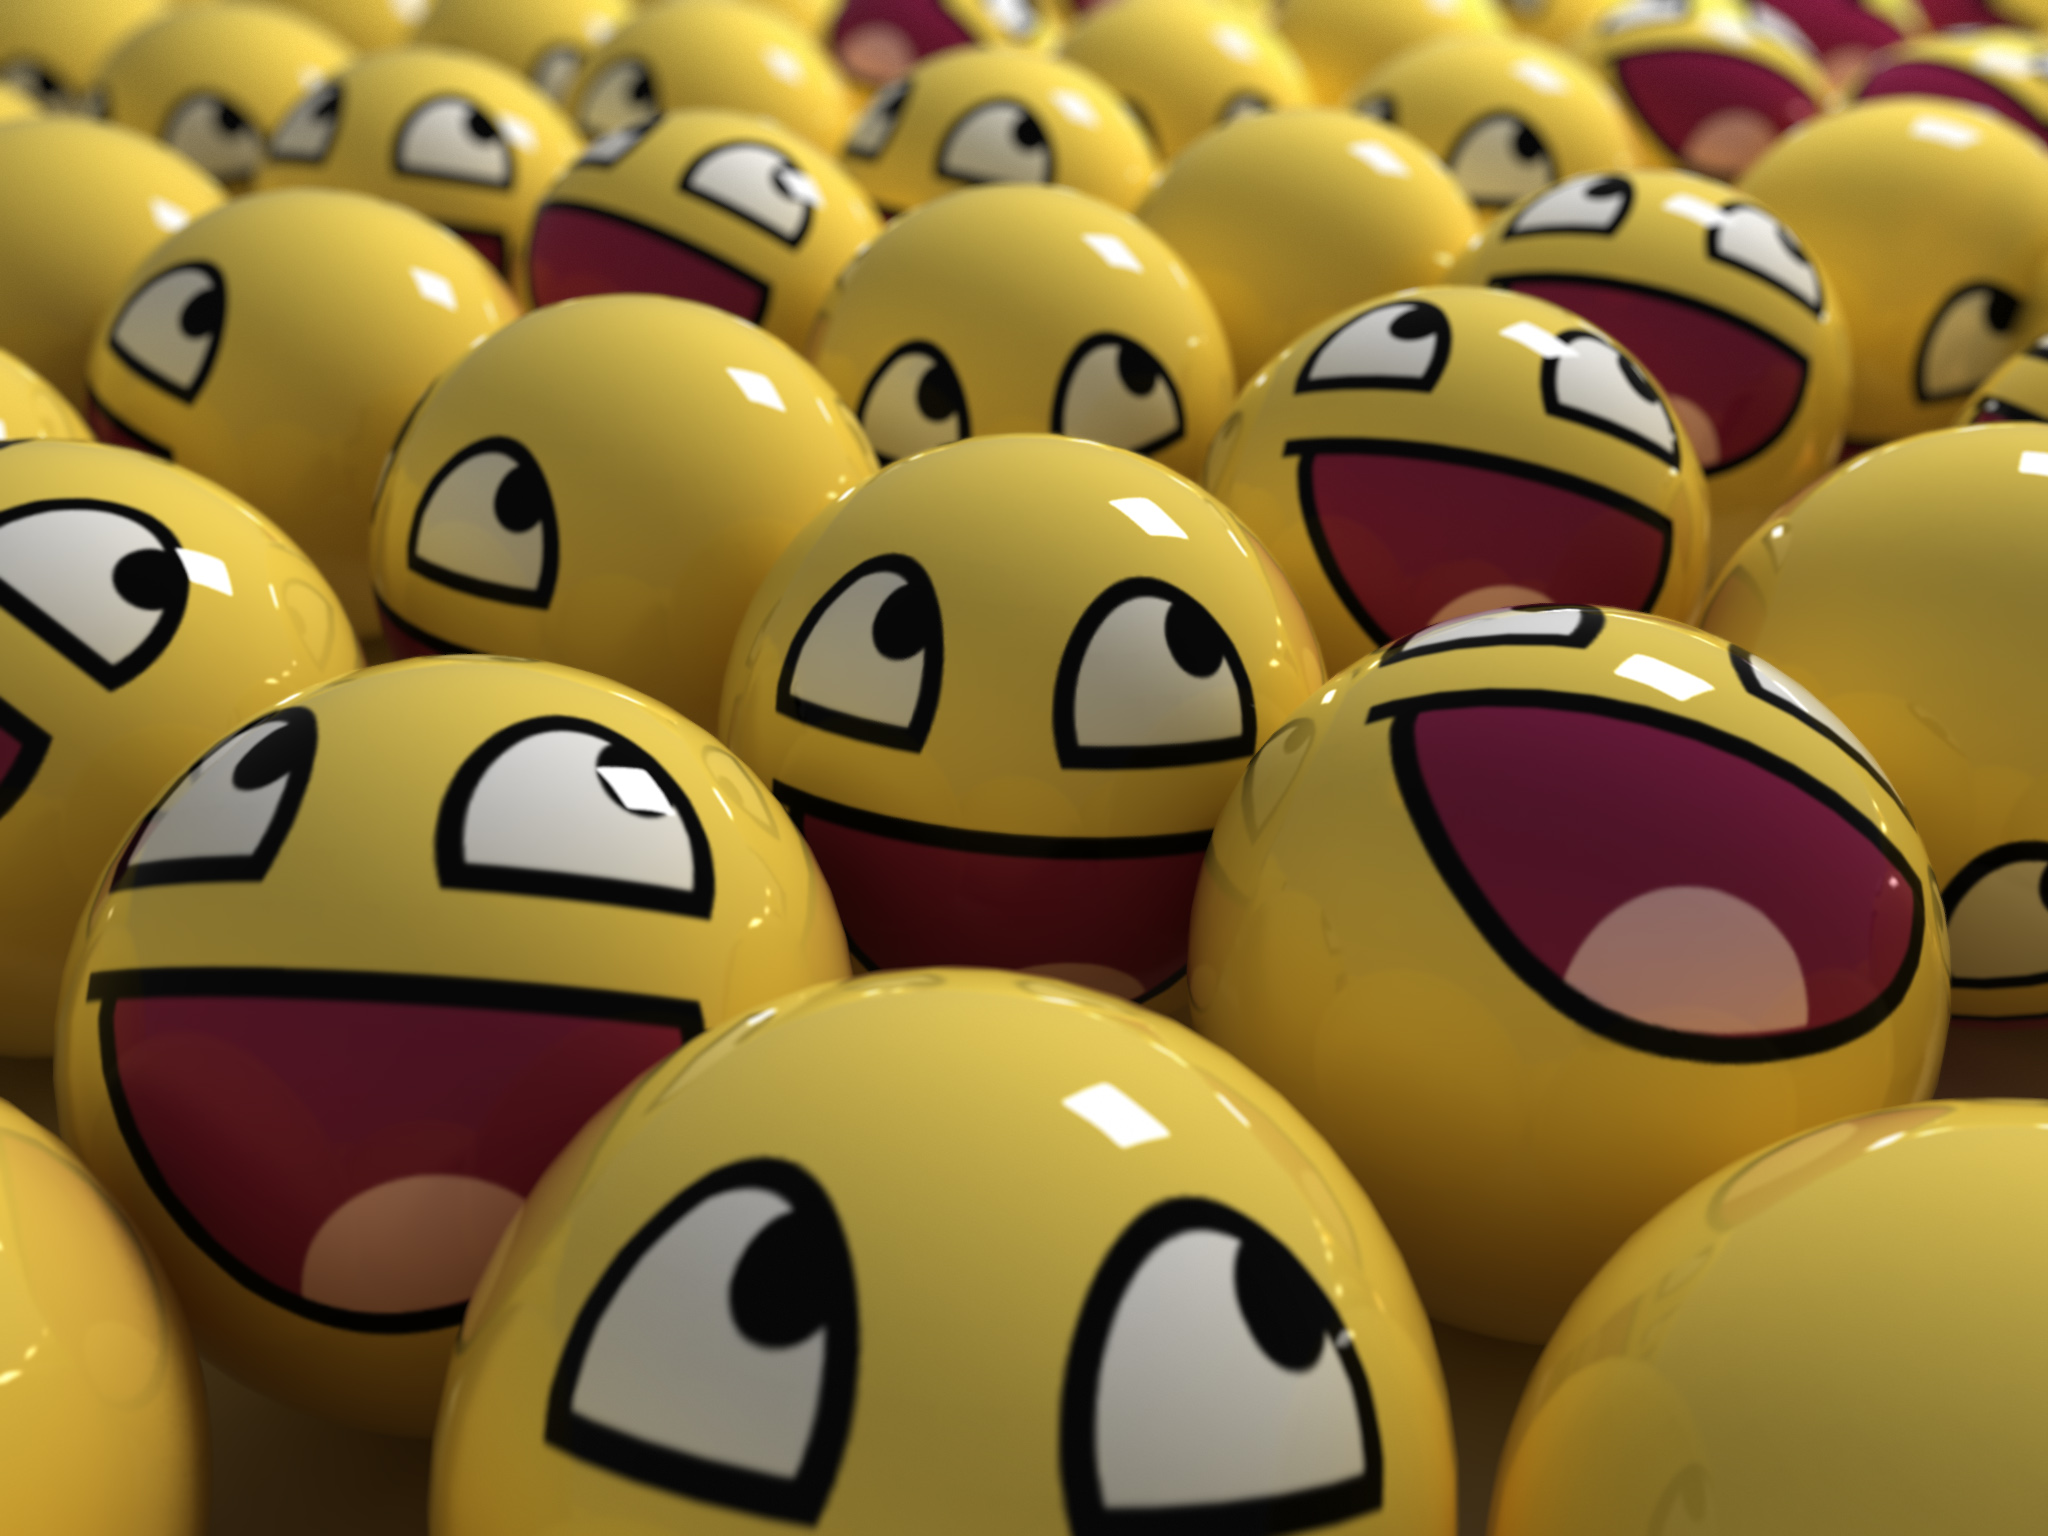 Smiley HD Wallpaper Background Image